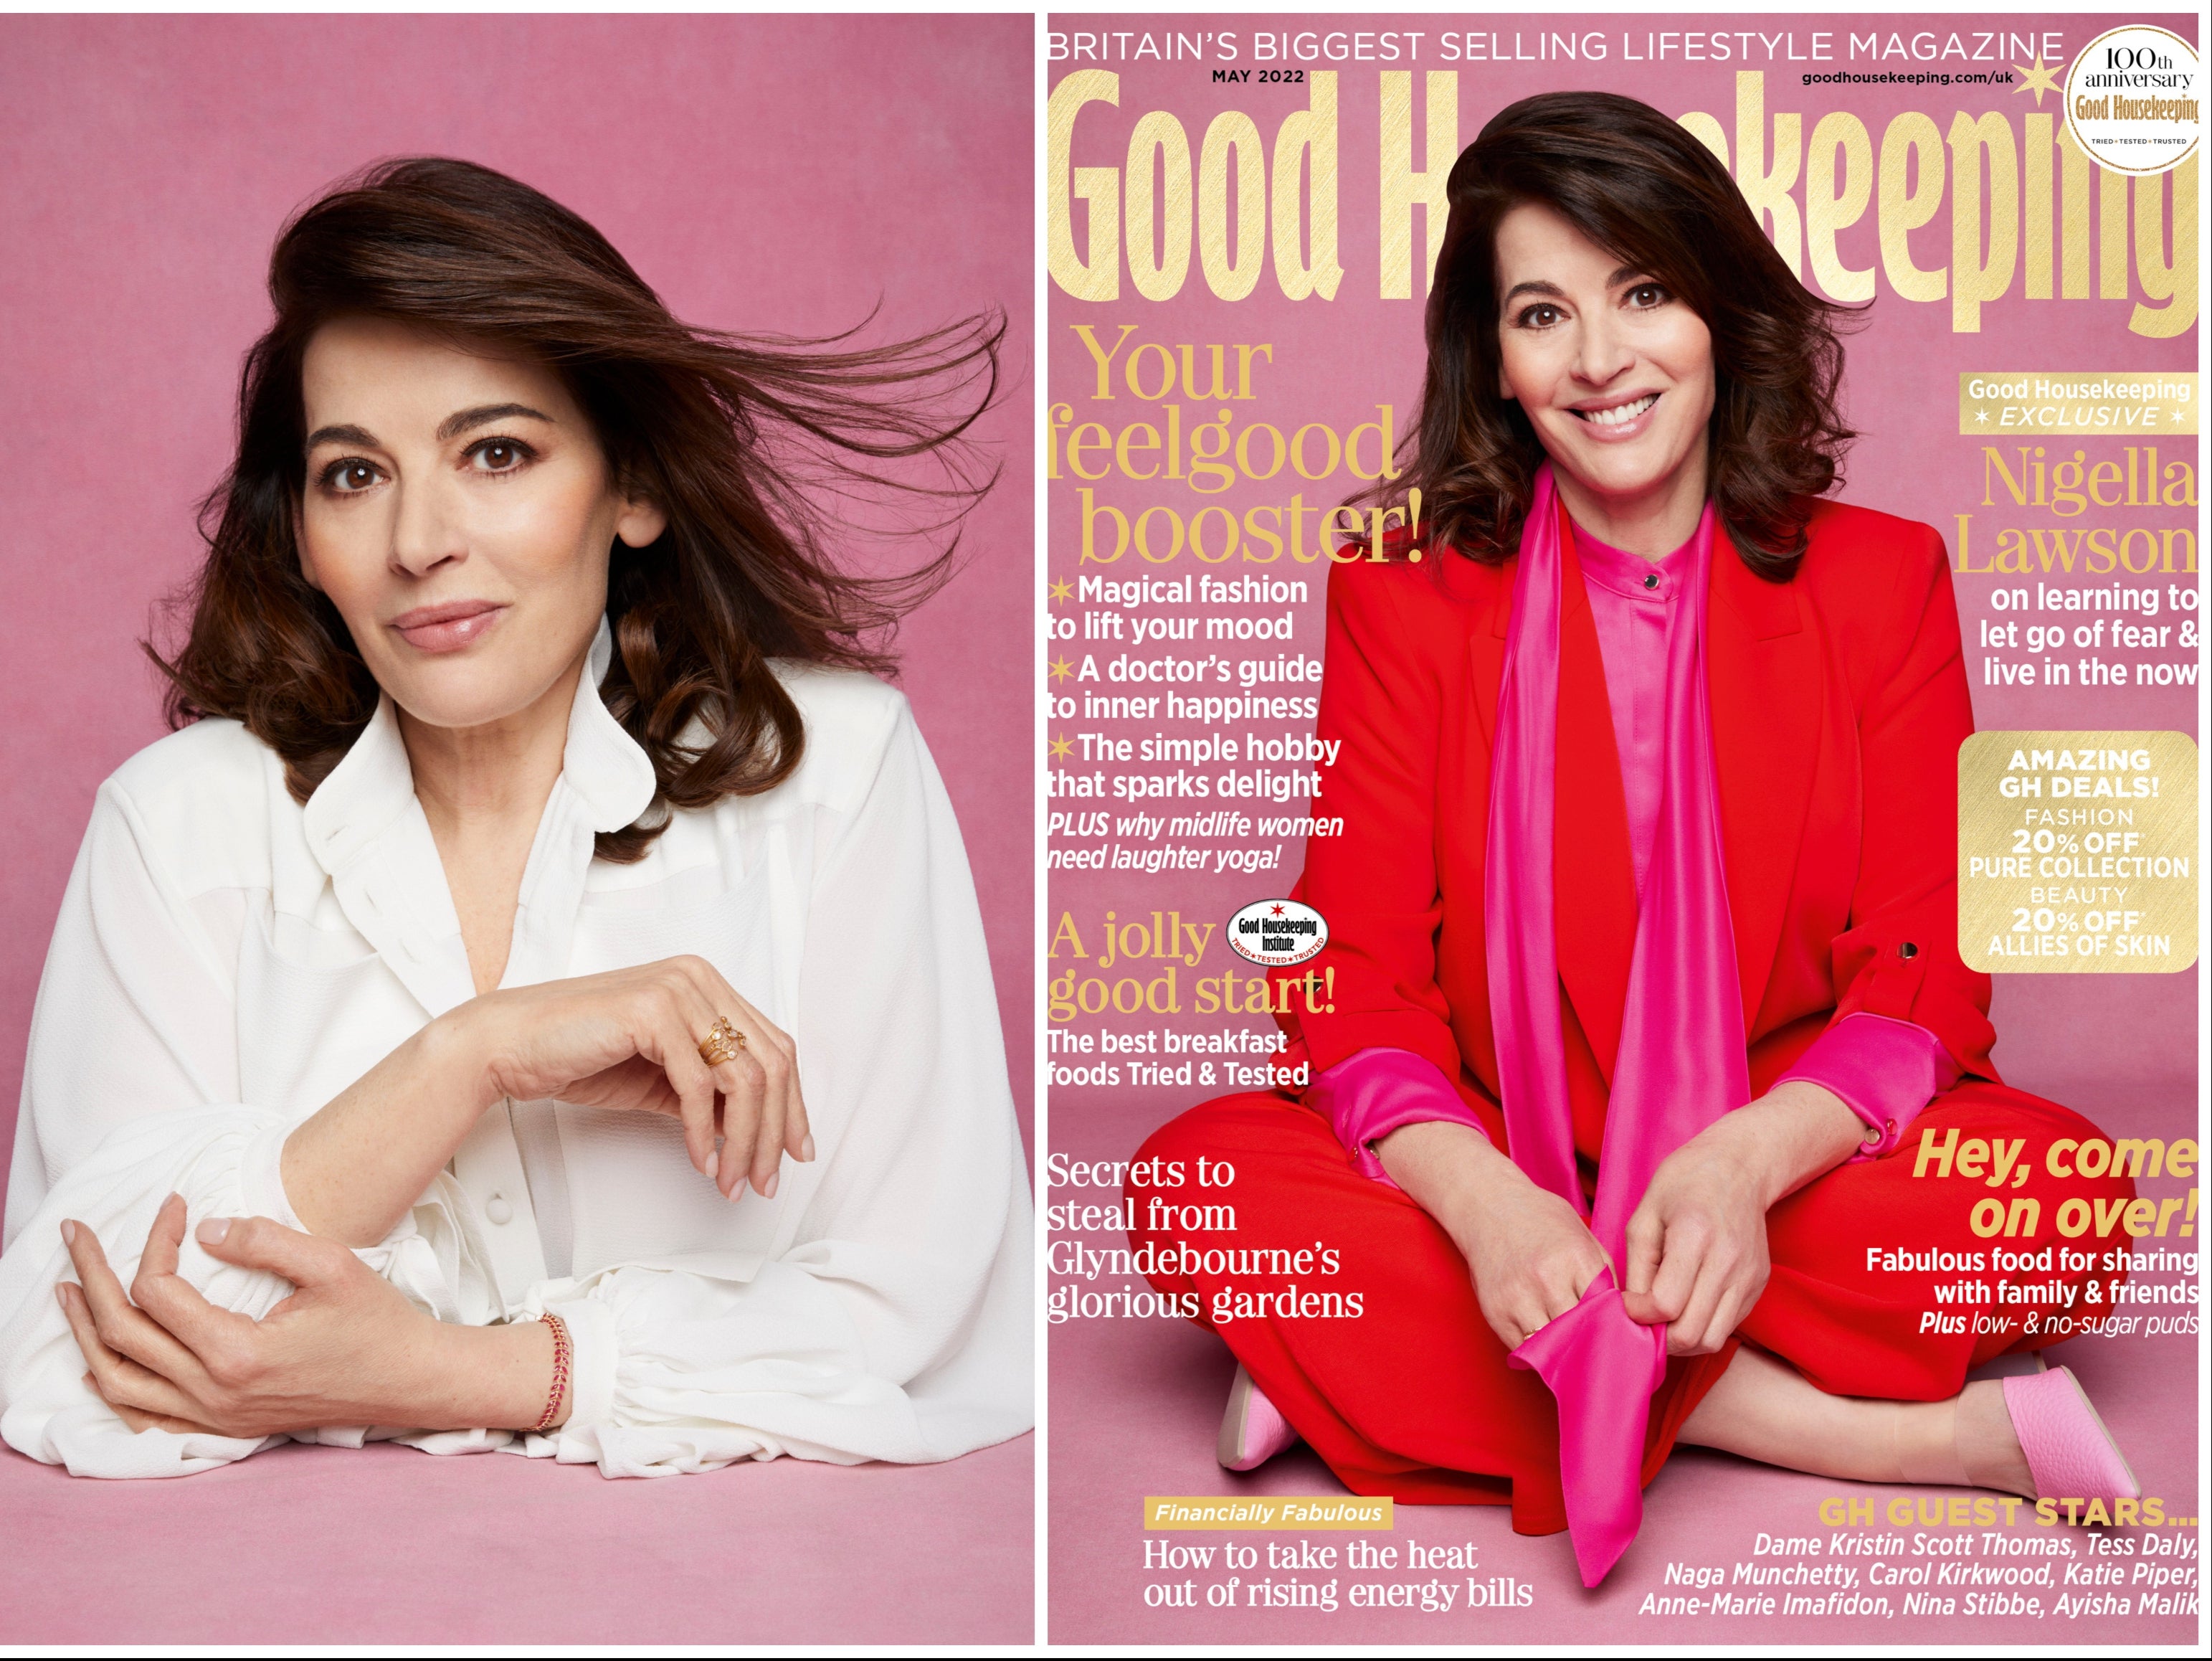 Nigella Lawson appears on May issue of Good Housekeeping